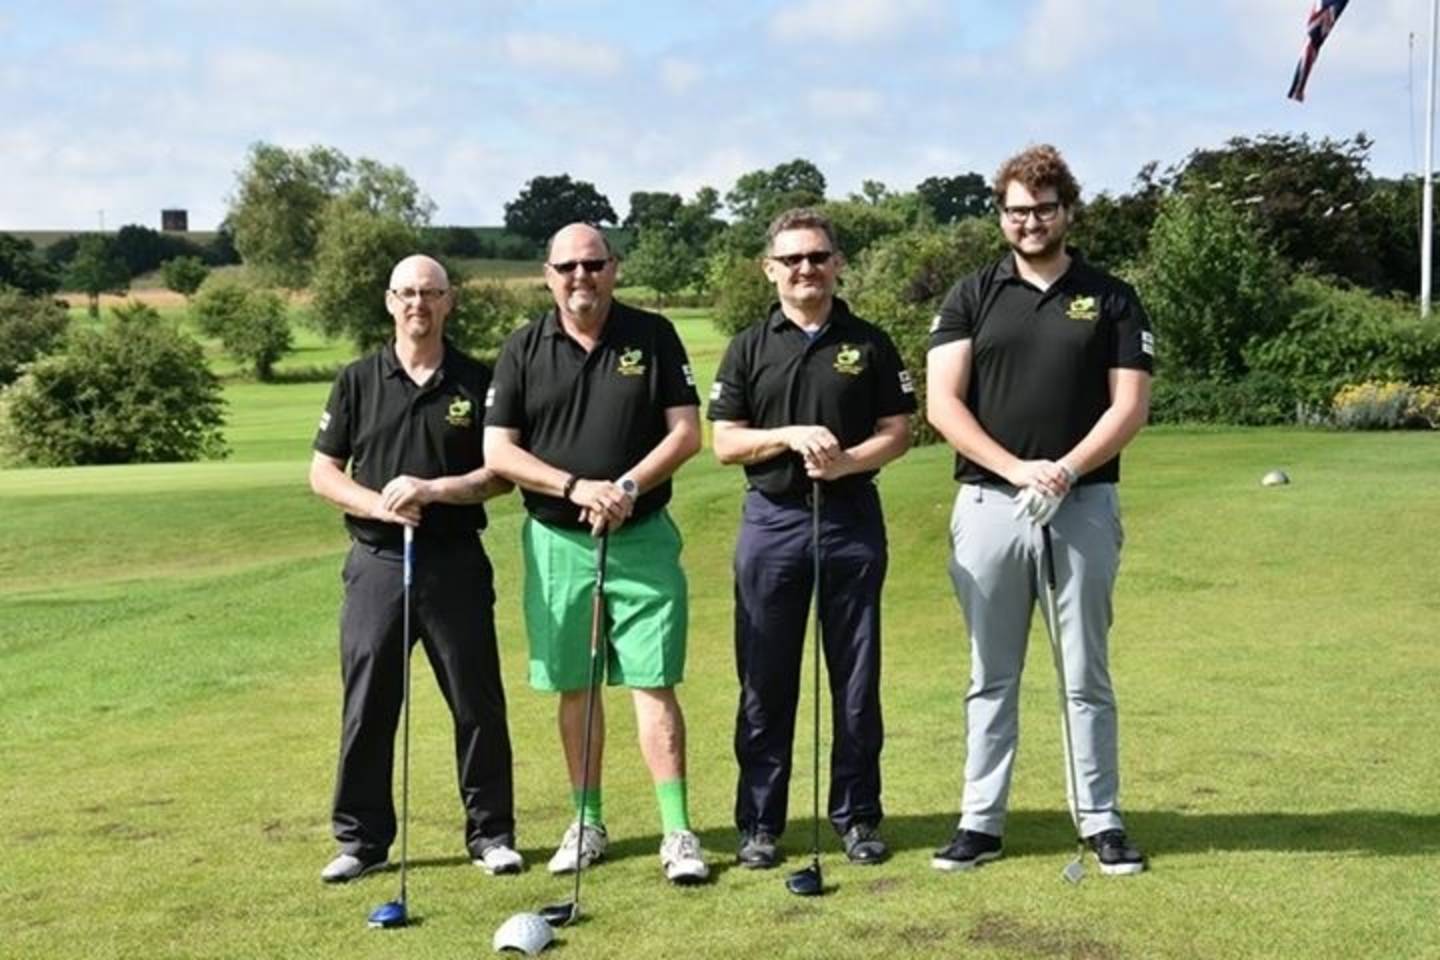 Image shows Simeon Hart, third from the left with his team mates out on the golf course. 